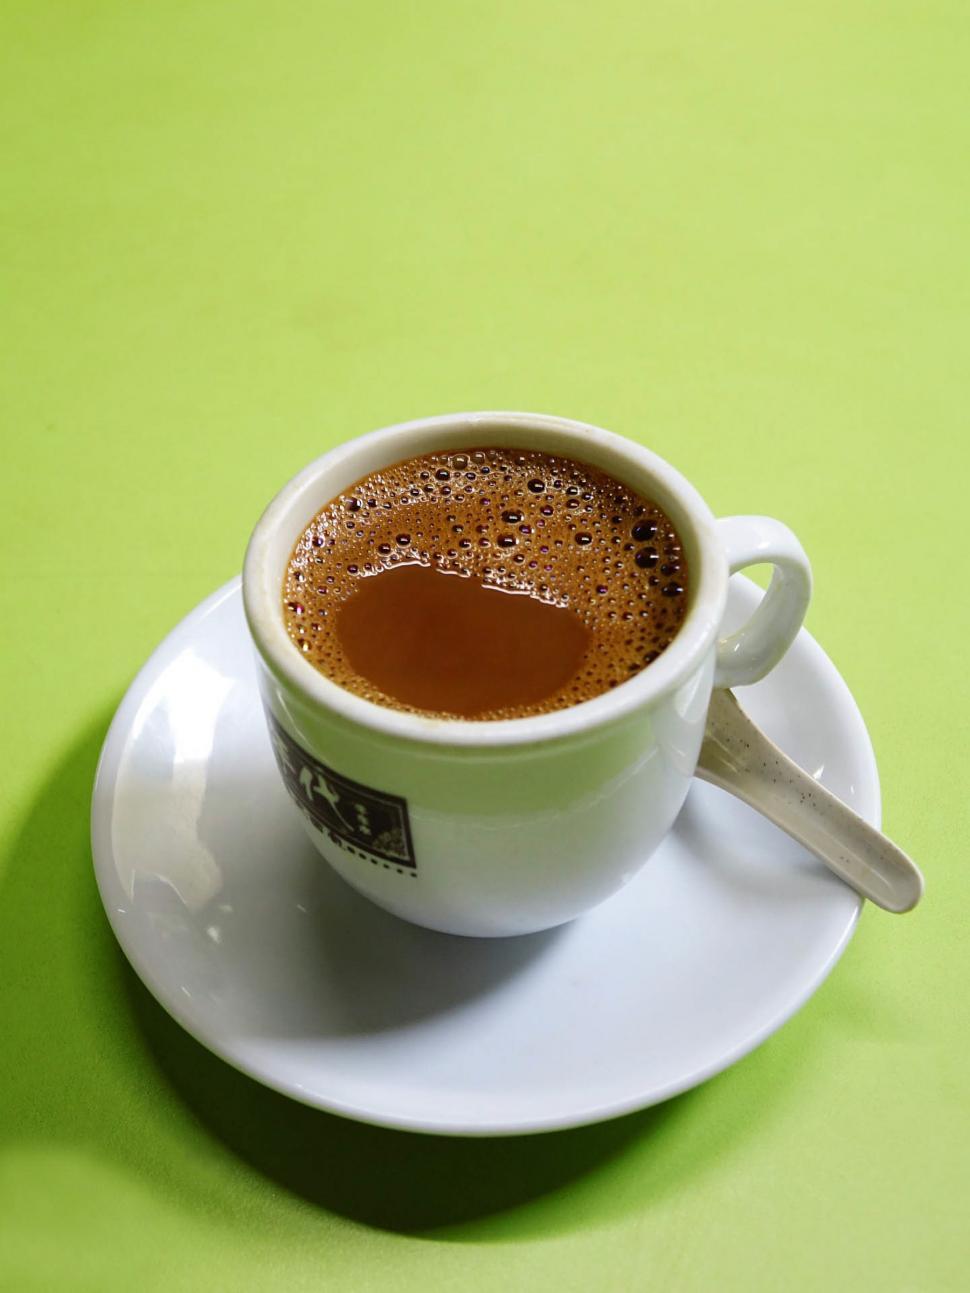 Free Image of A Cup of Coffee on a Saucer 